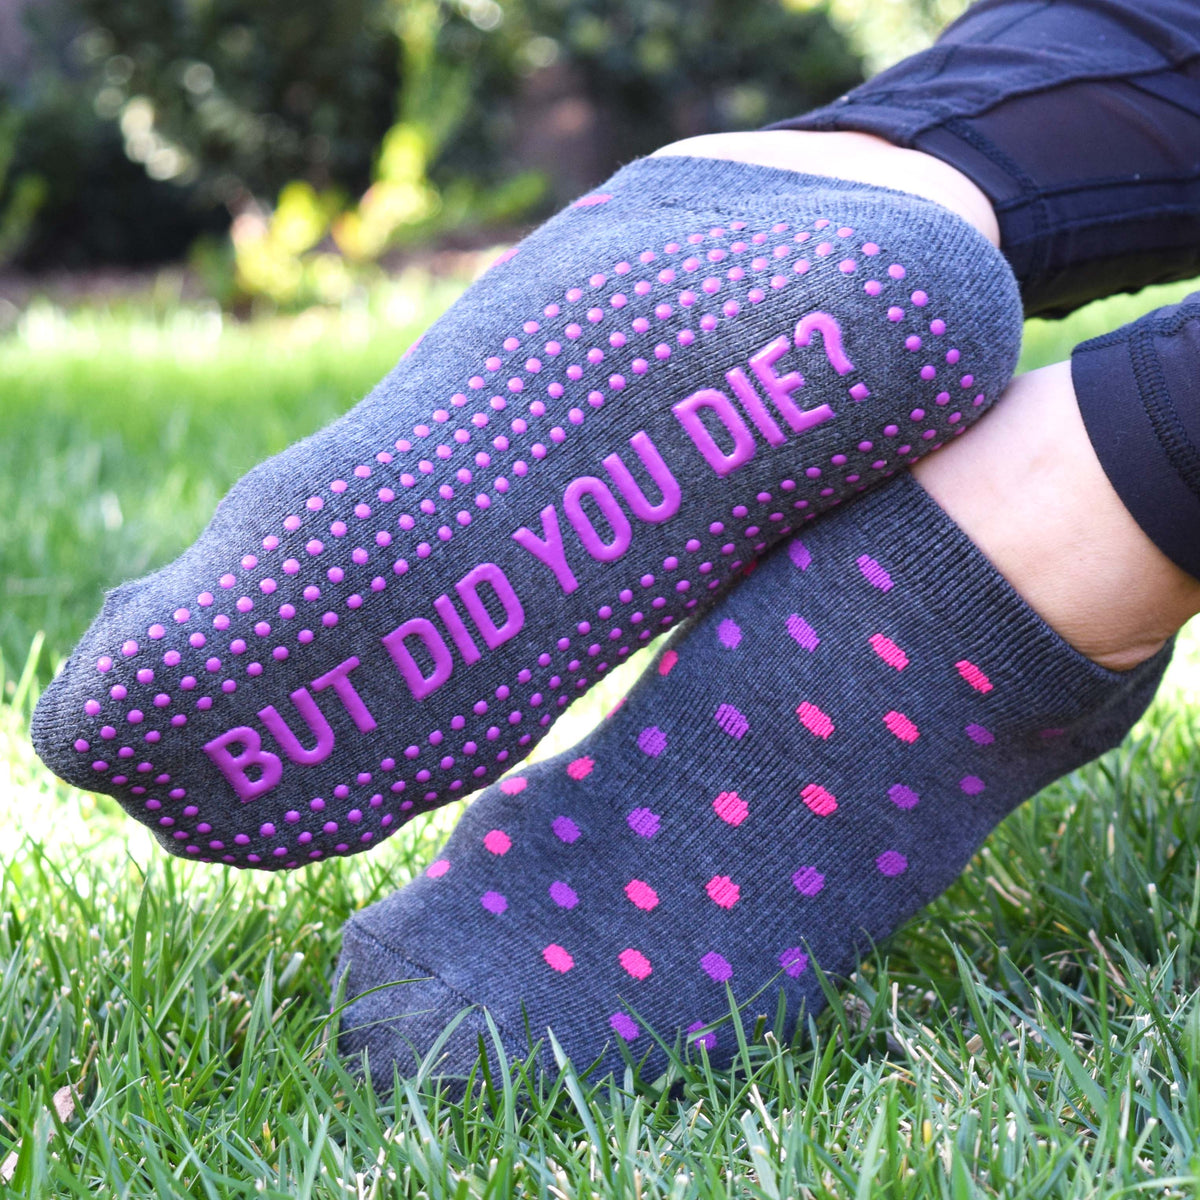 But Did You Die? - Sticky Socks for Barre, Pilates, Yoga – Life by Lexie